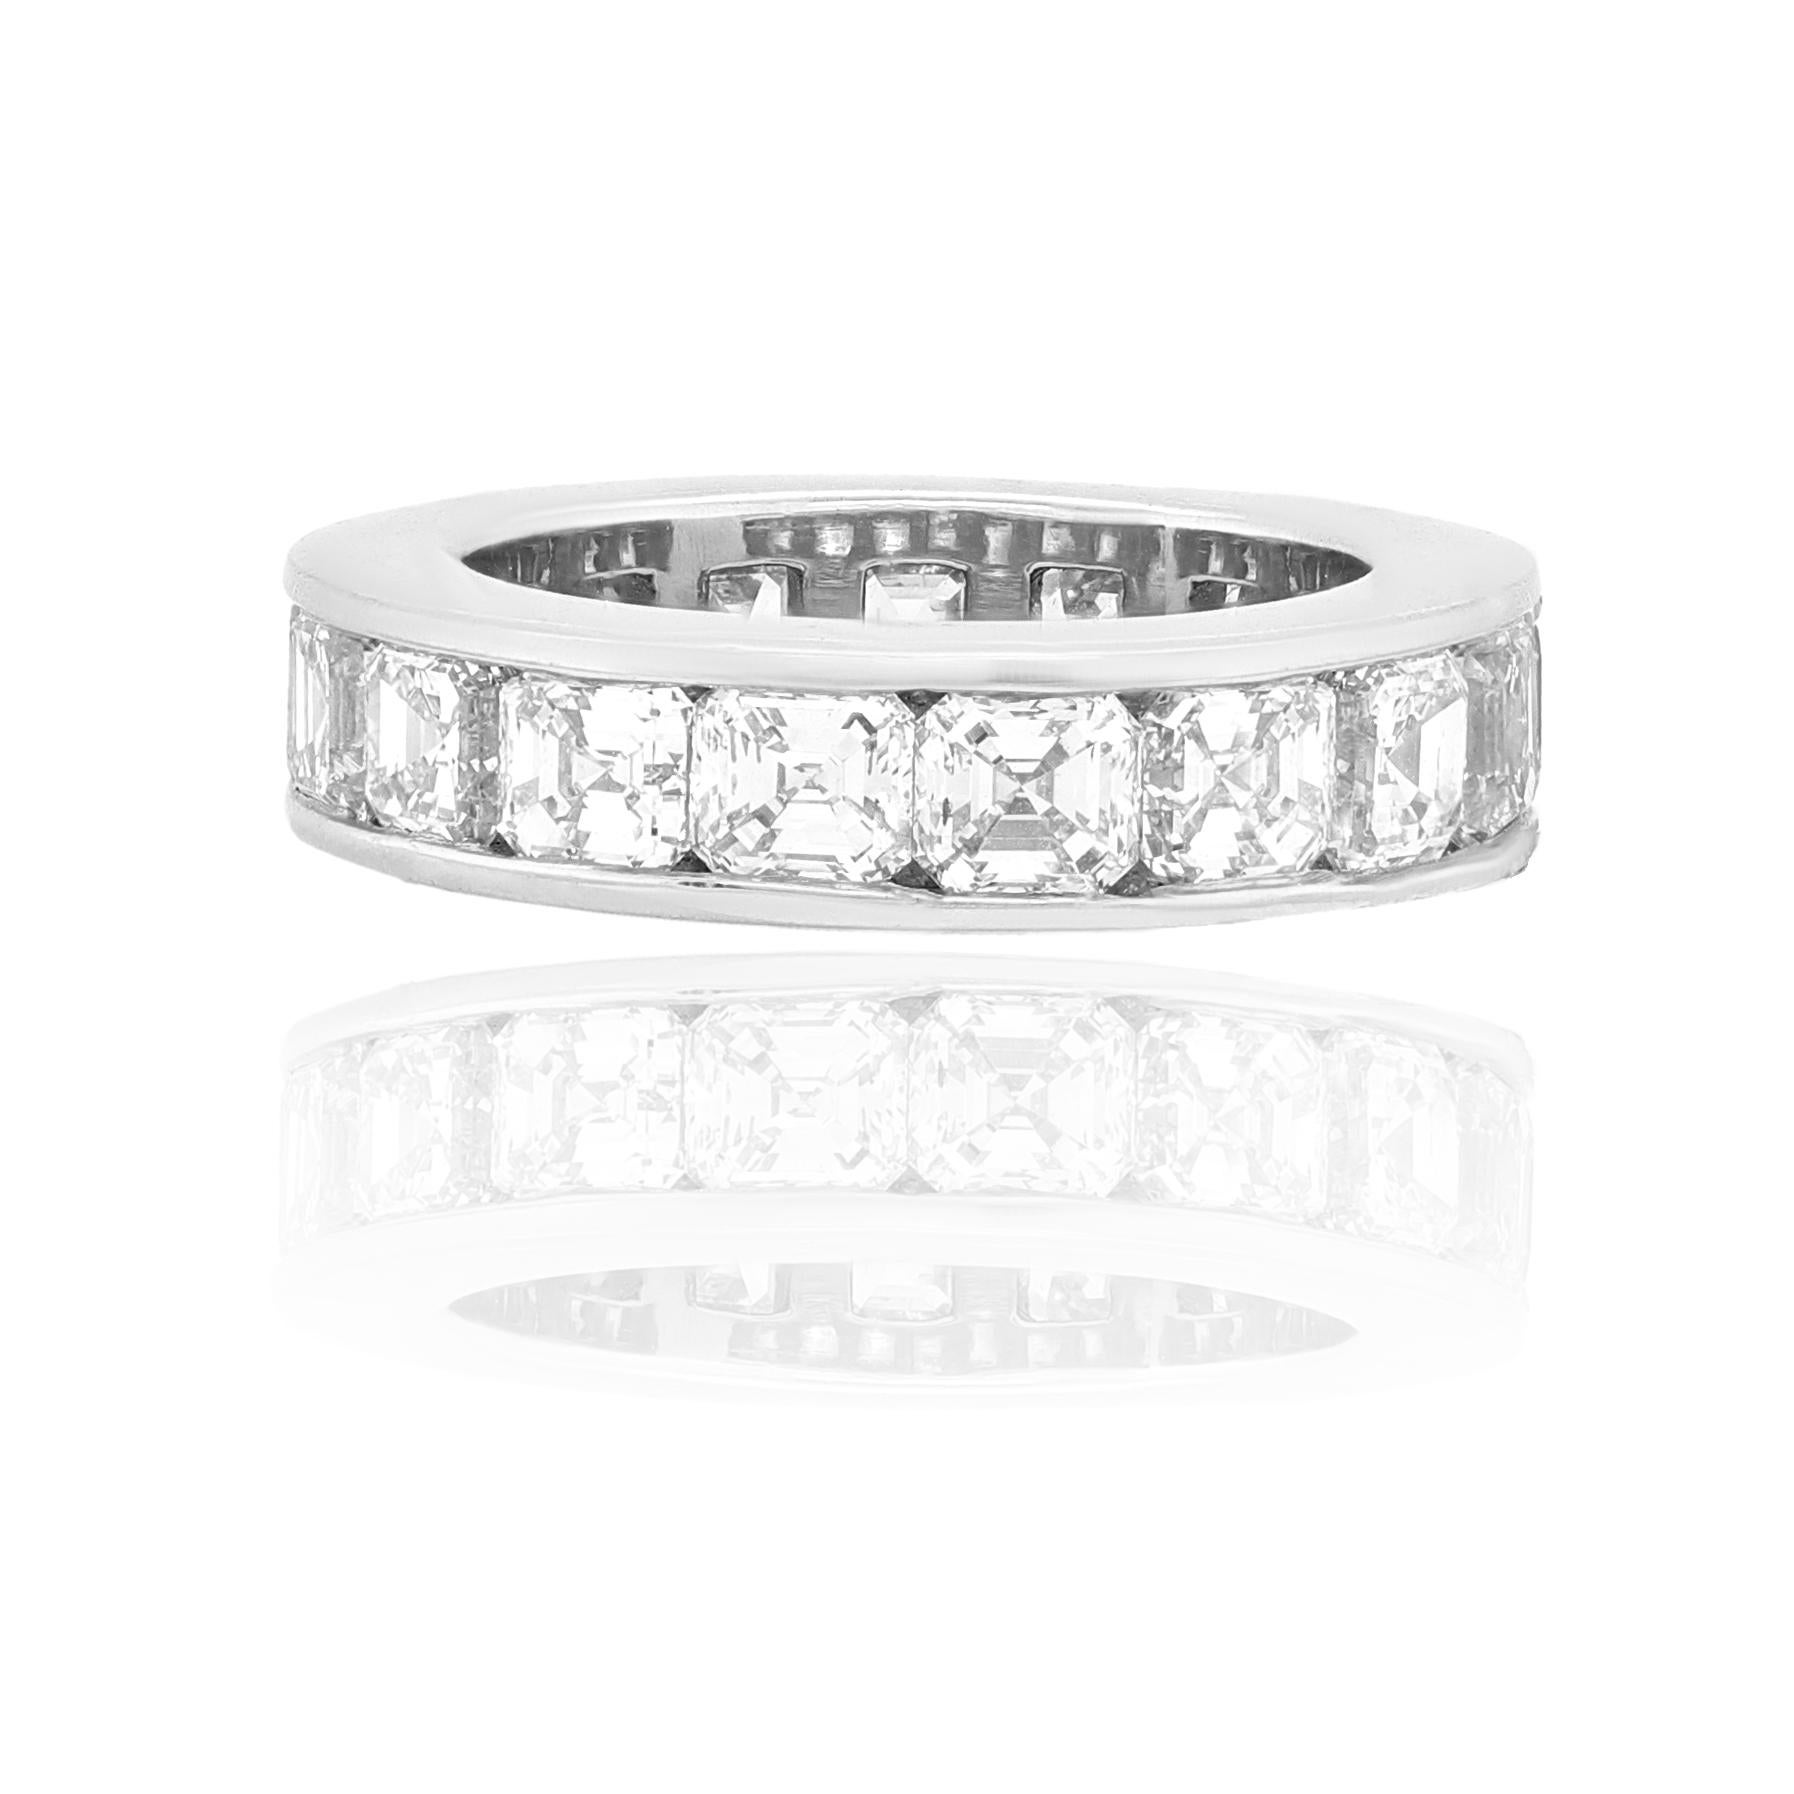 Platinum diamond channel set eternity band all the way around features 7.20ct  of princess cut diamonds 
Diana M. is a leading supplier of top-quality fine jewelry for over 35 years.
Diana M is one-stop shop for all your jewelry shopping, carrying